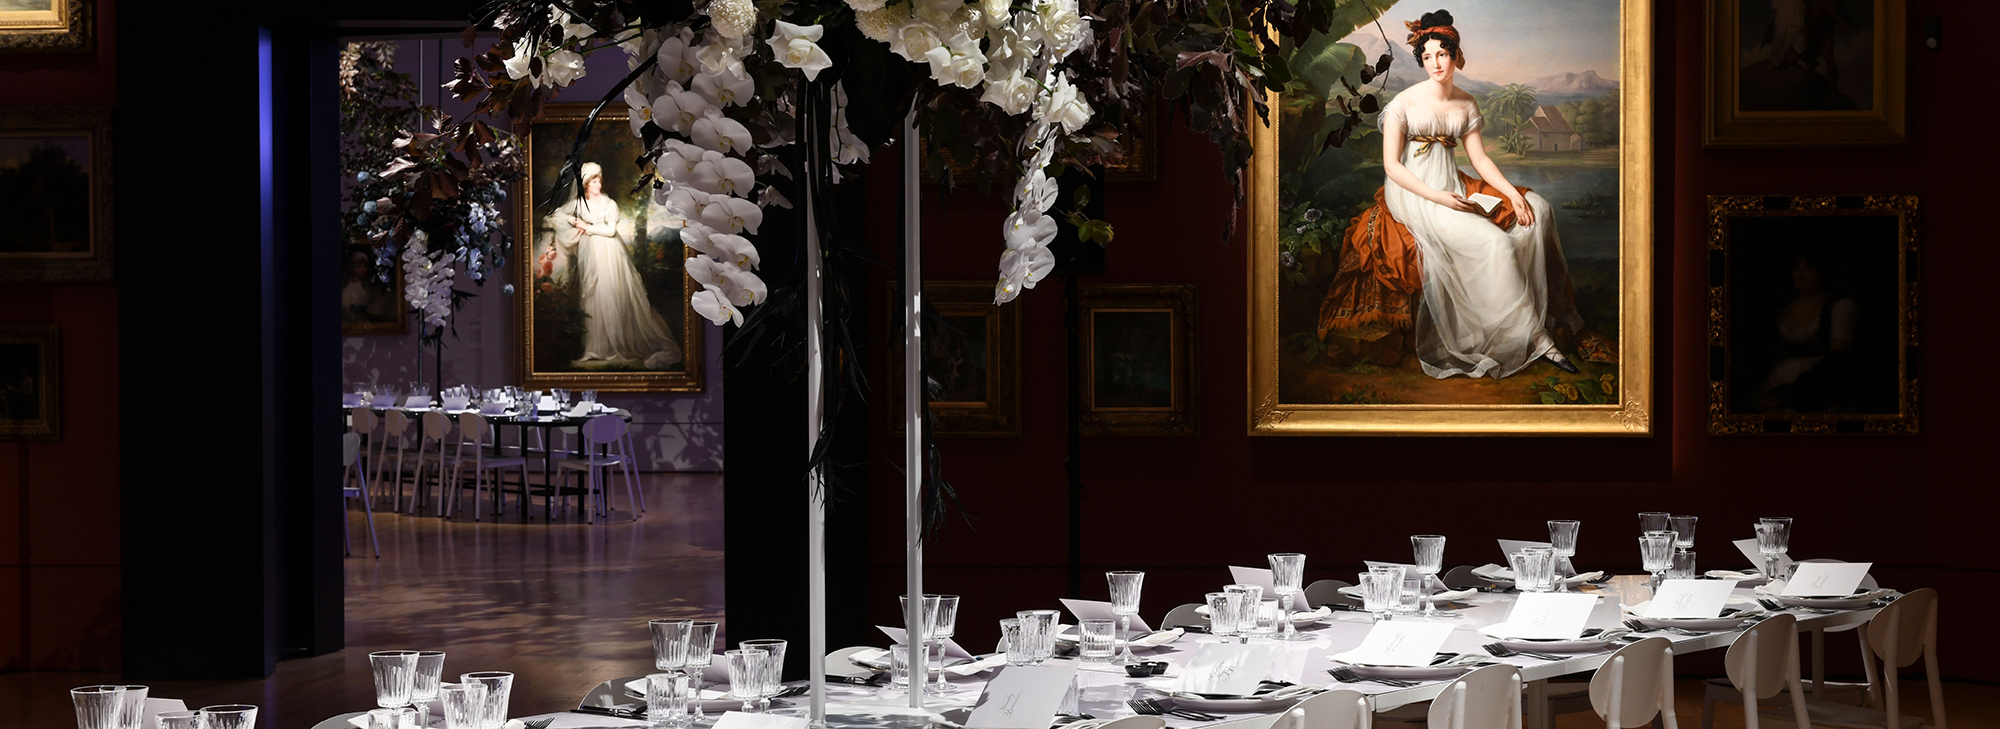 Scenes-from-an-exclusive-dinner-at-NGV-Exp-Banner